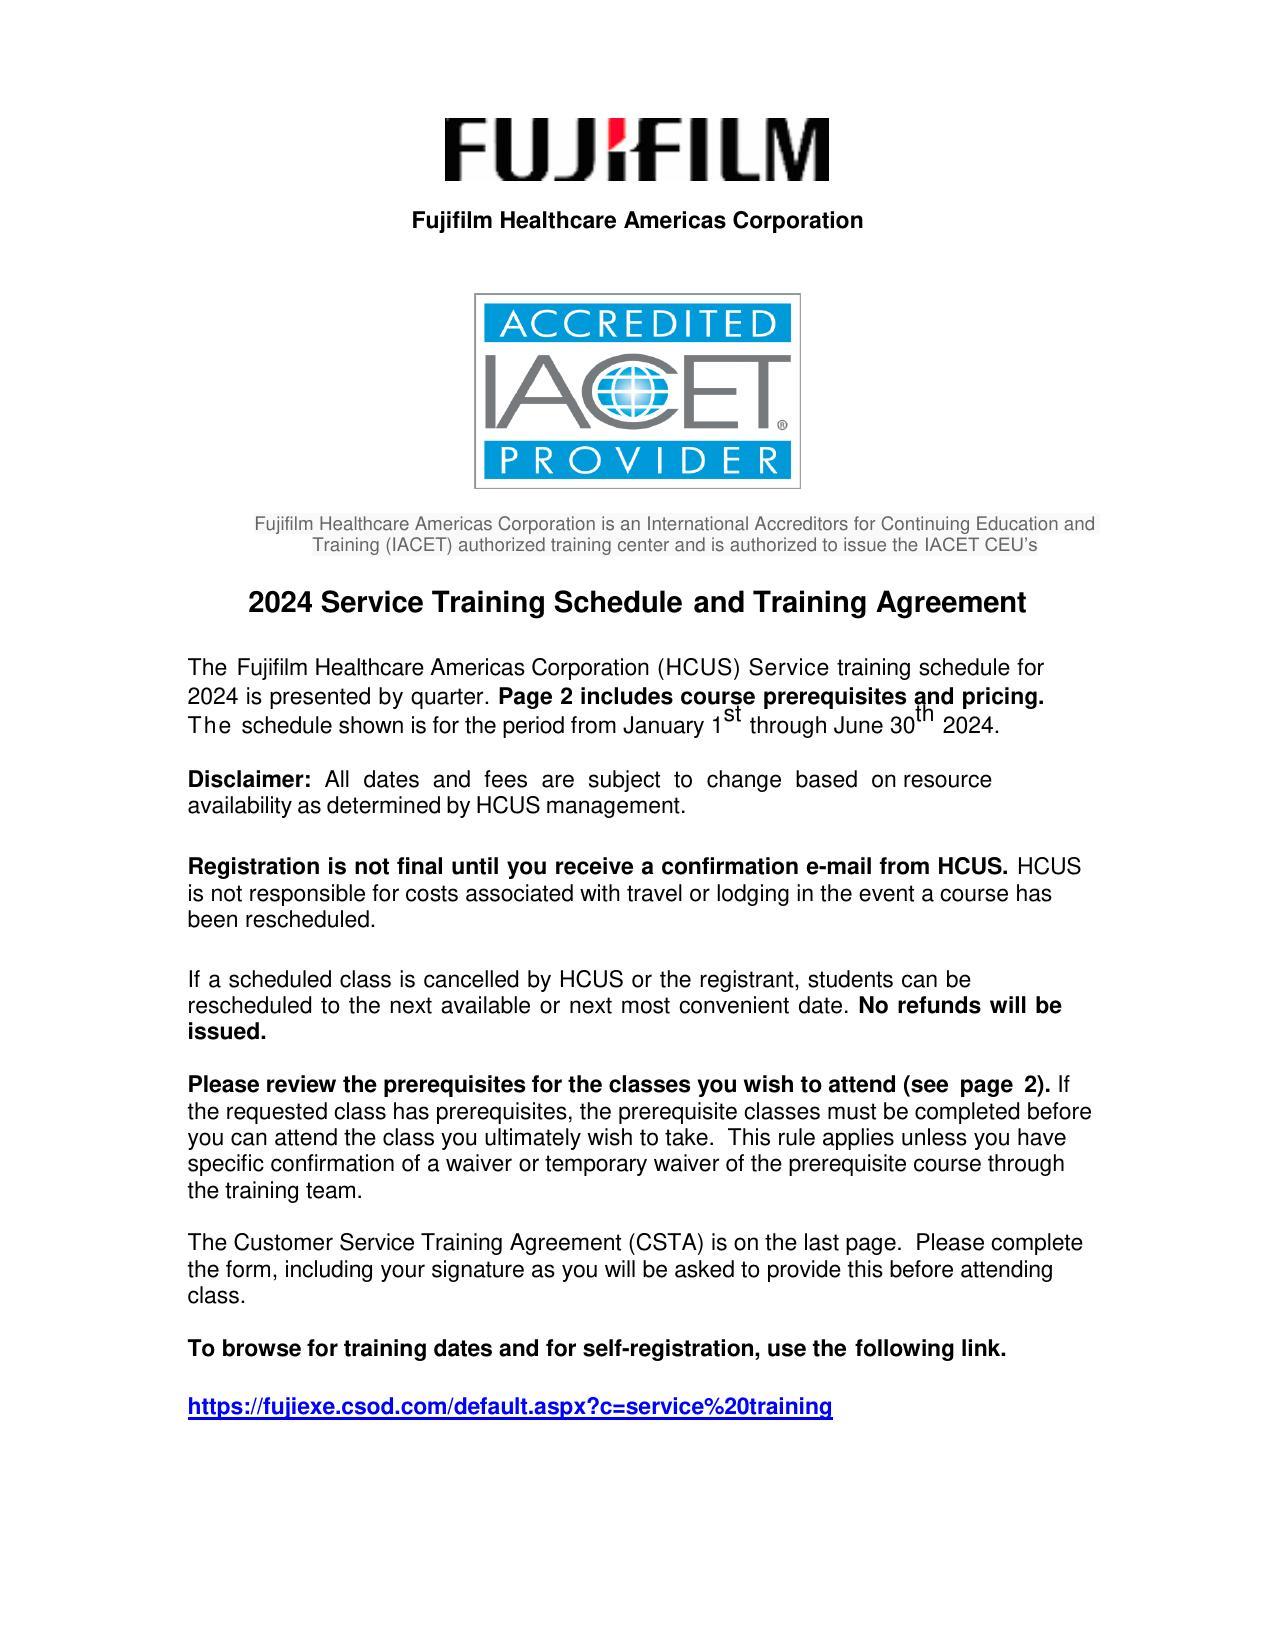 fujifilm-healthcare-americas-service-training-schedule-and-training-agreement.pdf